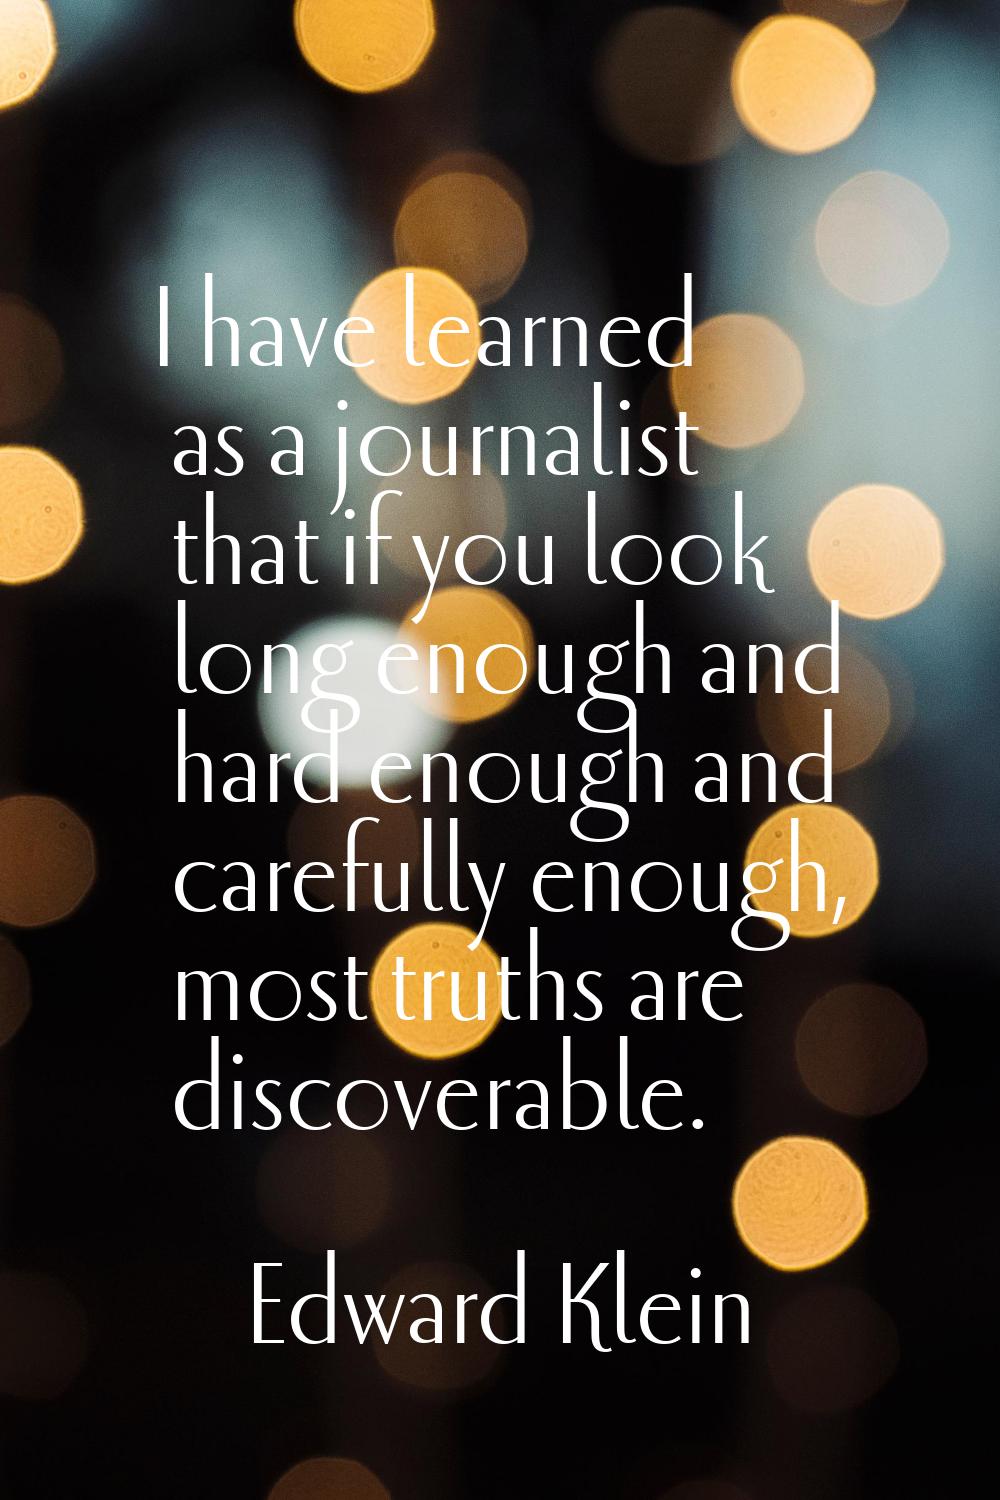 I have learned as a journalist that if you look long enough and hard enough and carefully enough, m